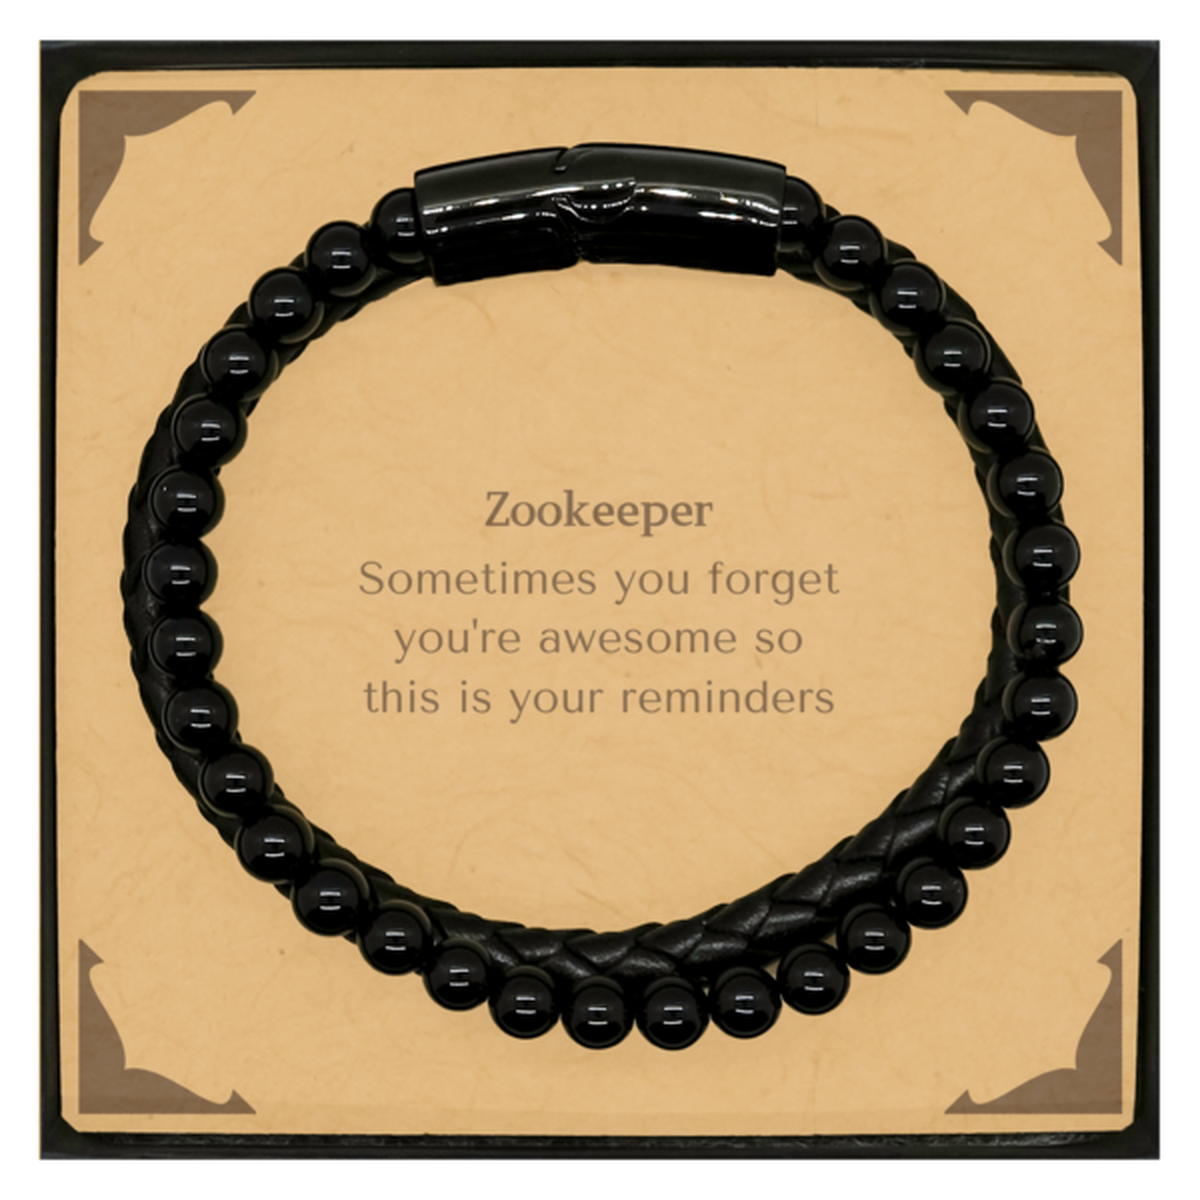 Sentimental Zookeeper Stone Leather Bracelets, Zookeeper Sometimes you forget you're awesome so this is your reminders, Graduation Christmas Birthday Gifts for Zookeeper, Men, Women, Coworkers